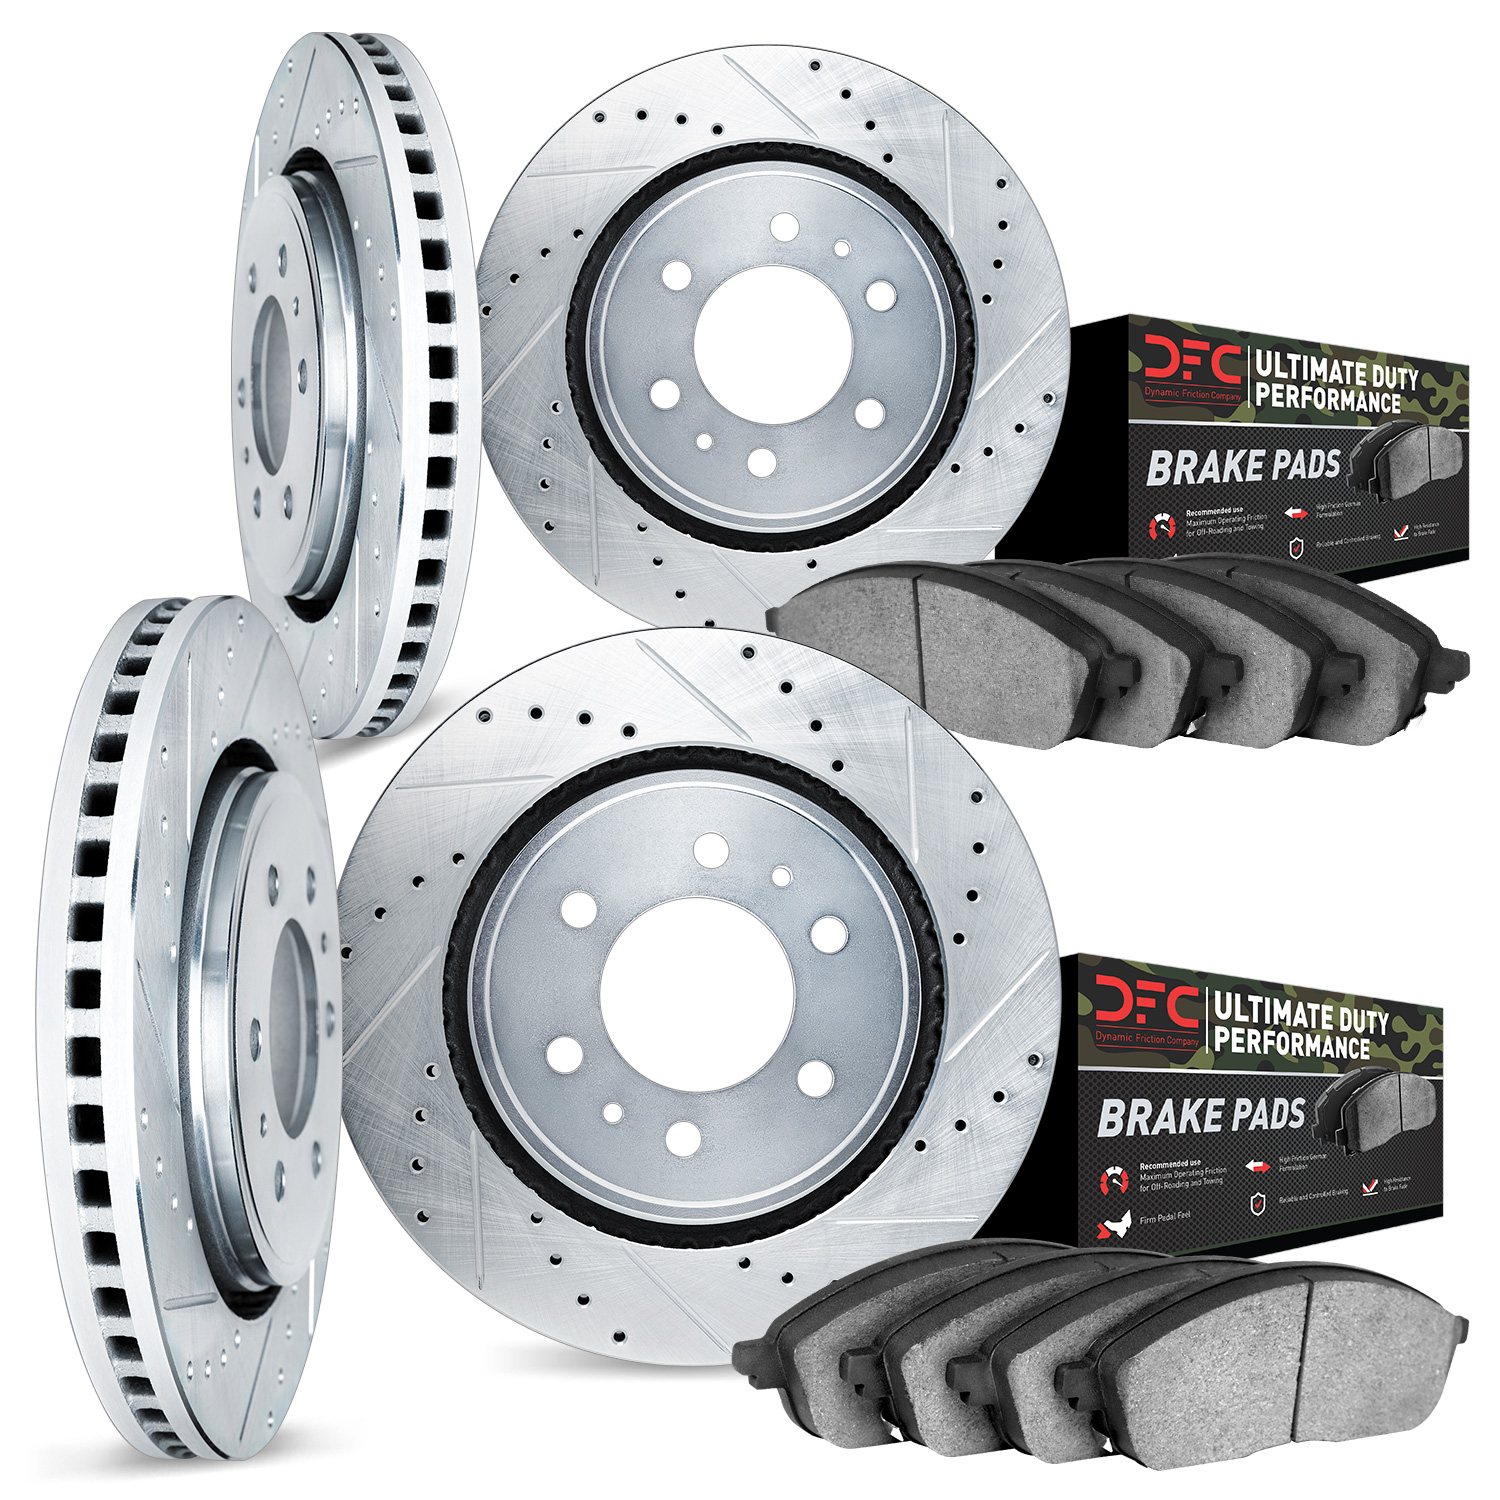 7404-48012 Drilled/Slotted Brake Rotors with Ultimate-Duty Brake Pads Kit [Silver], 2009-2014 GM, Position: Front and Rear